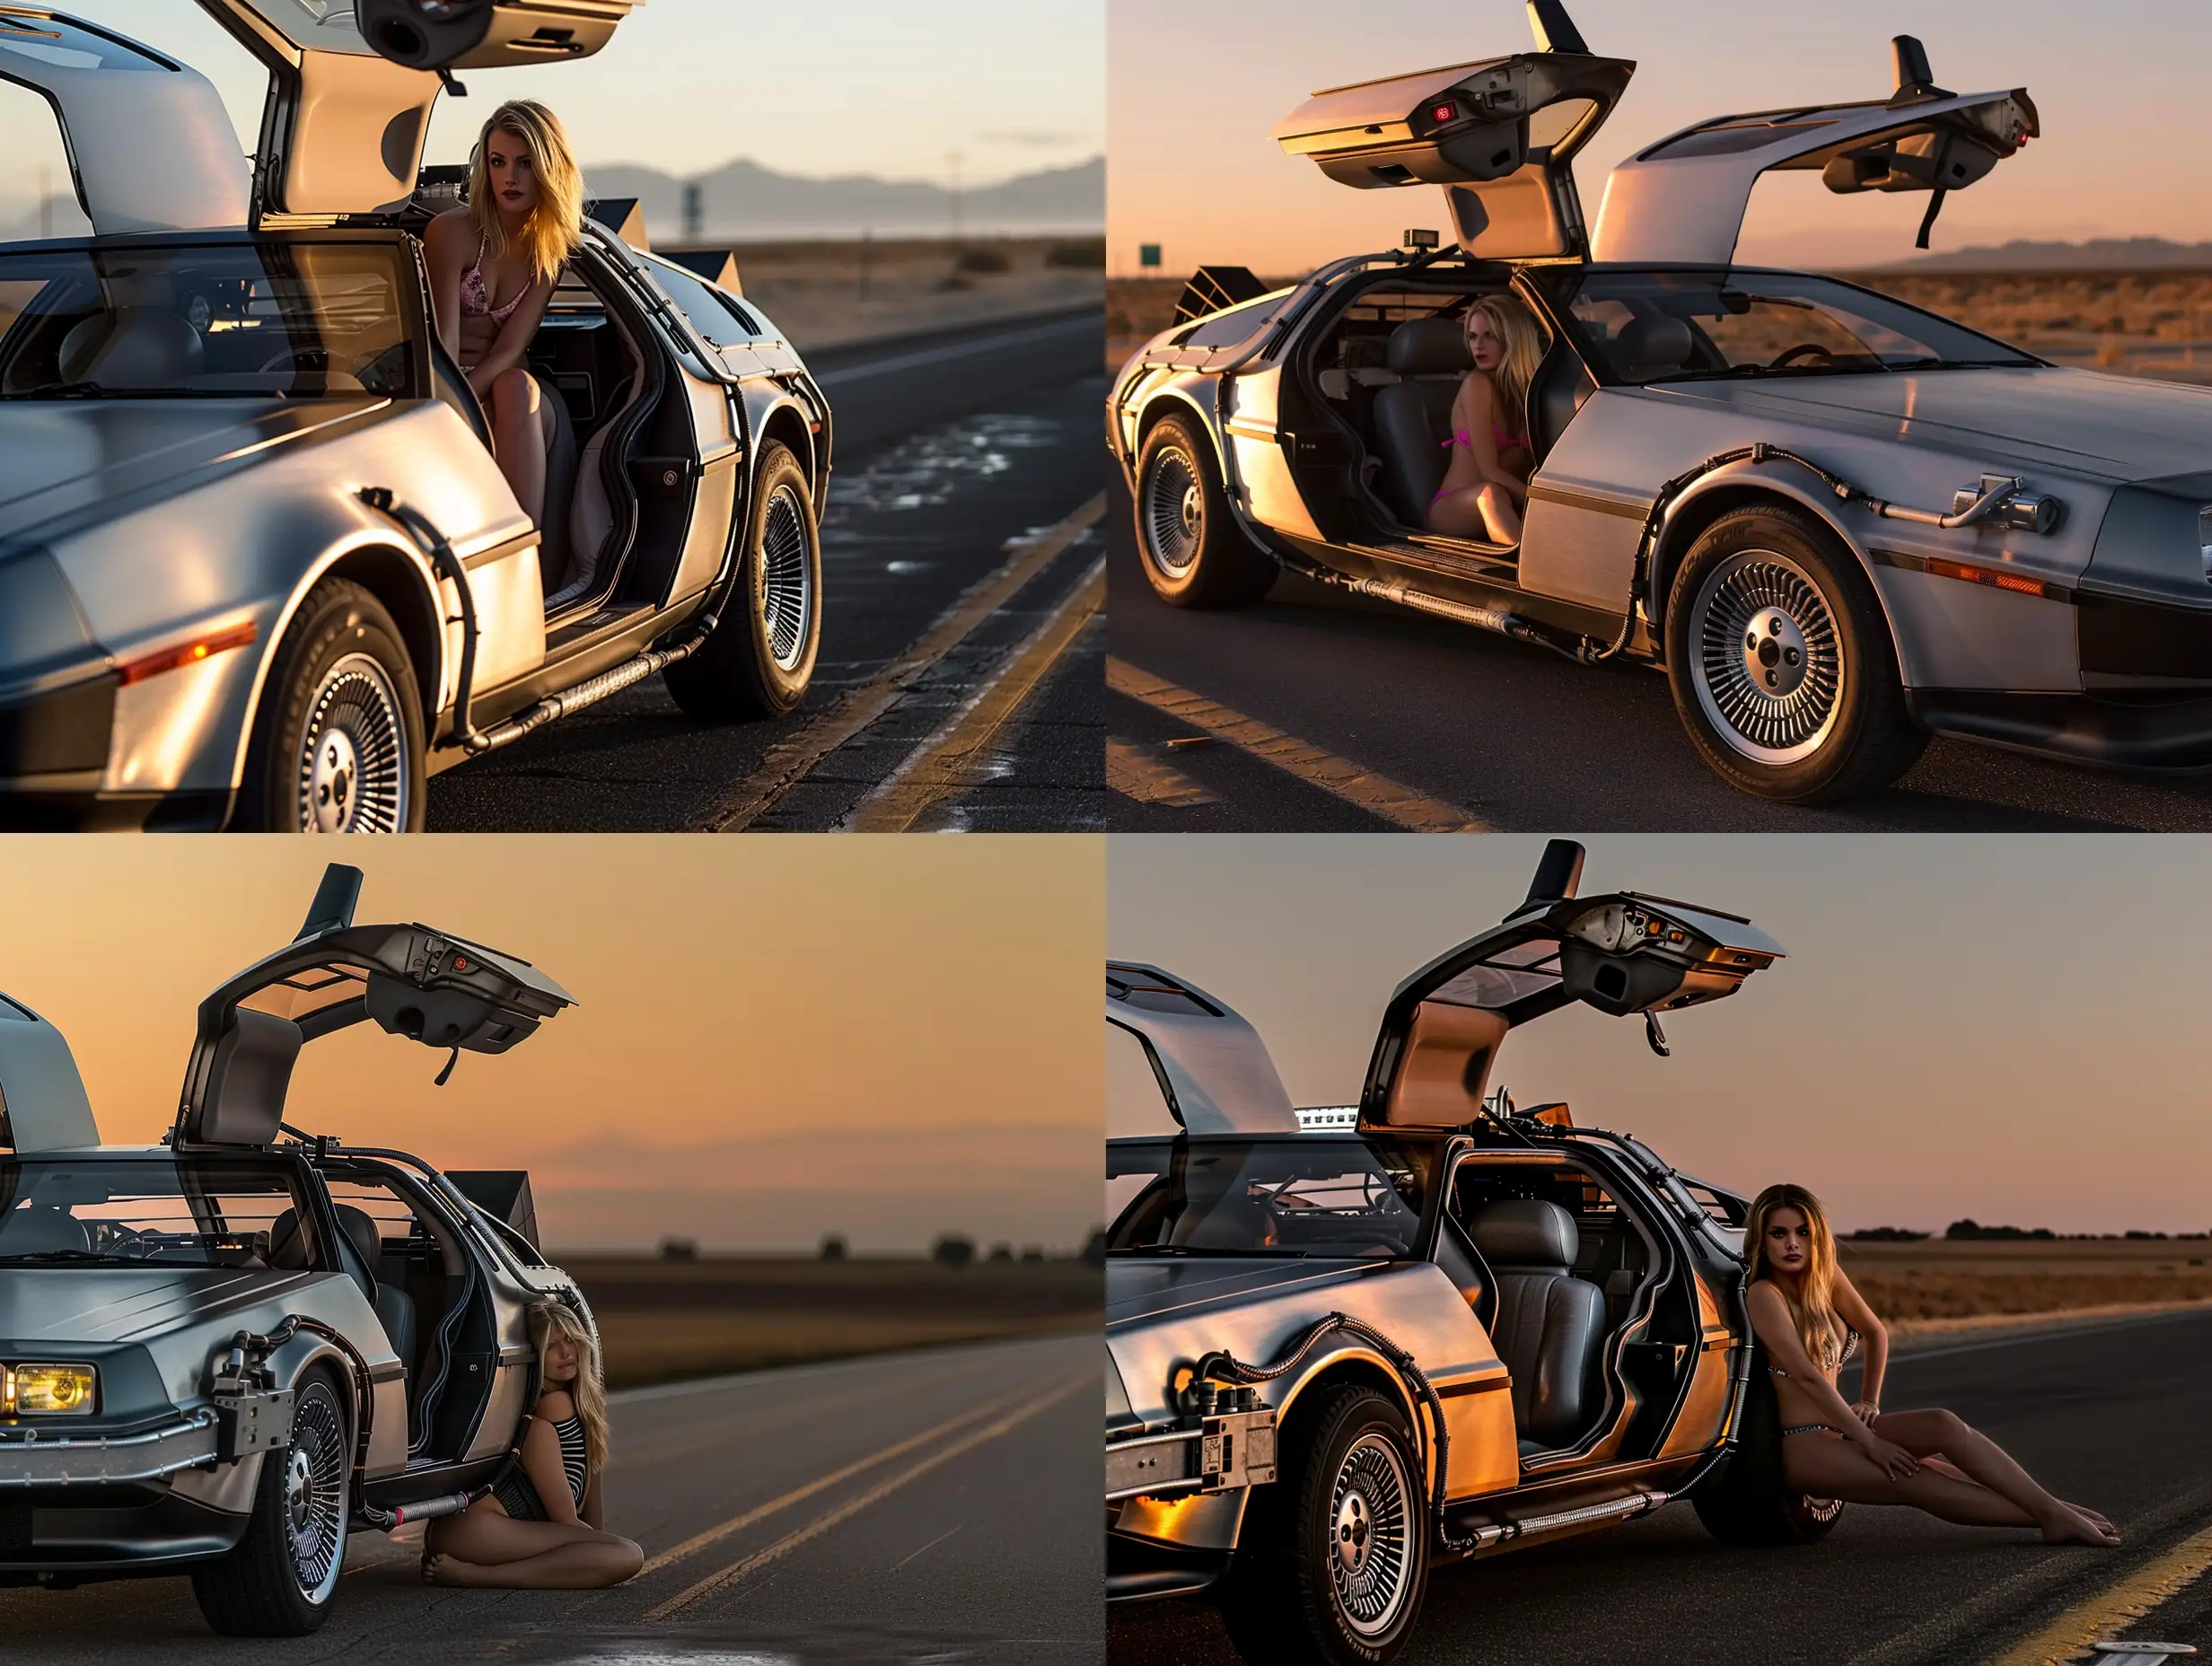 Back-to-the-Future-Delorean-on-Deserted-Road-with-Blonde-Woman-in-Bikini-at-Dawn